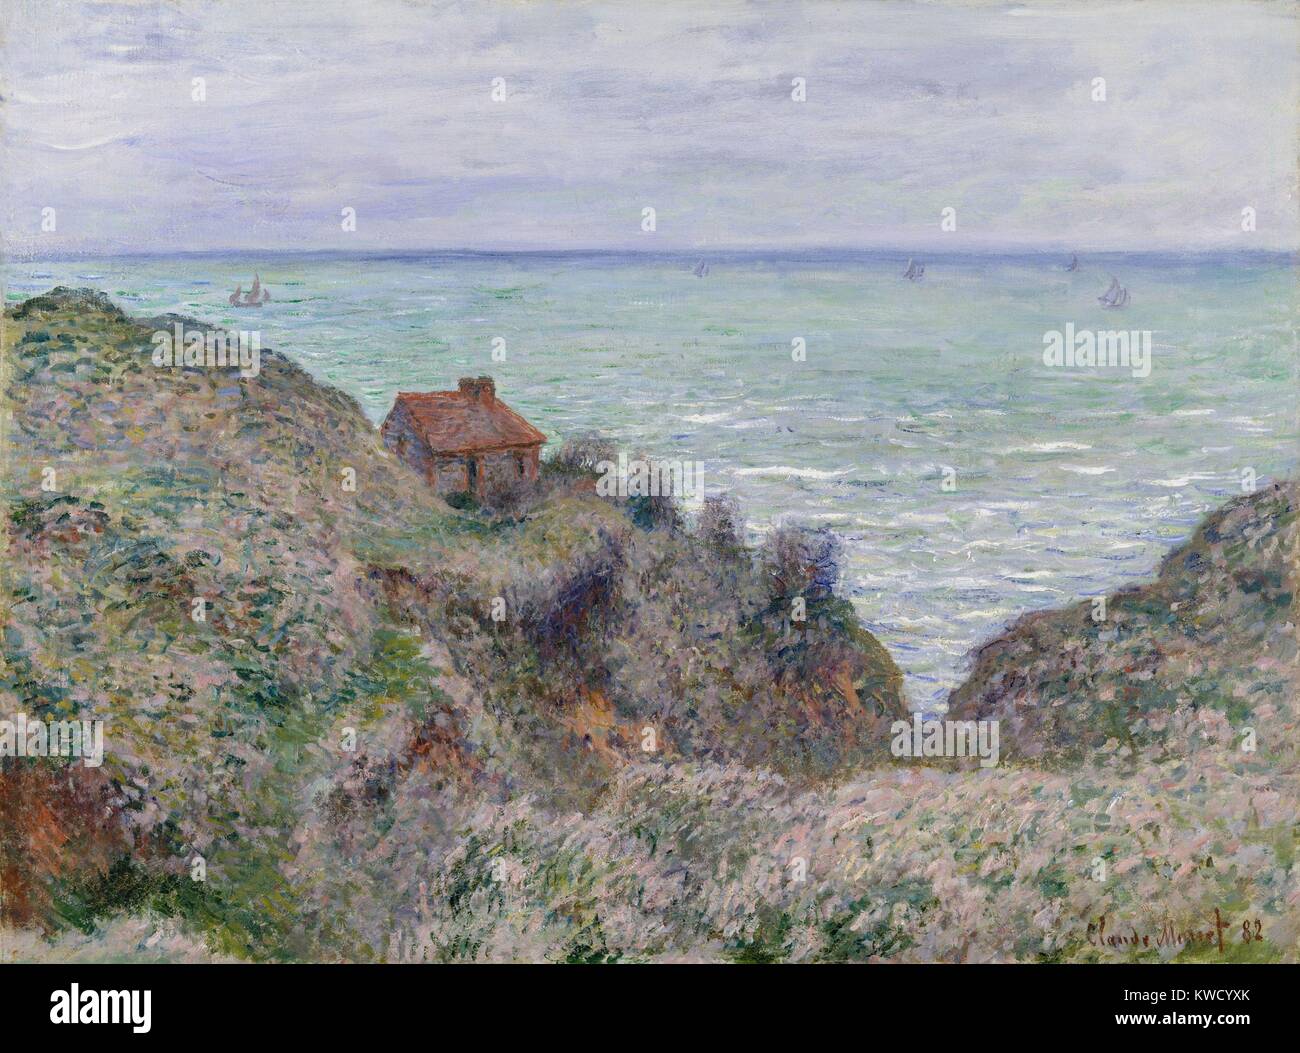 Cabin of the Customs Watch, by Claude Monet, 1882, French impressionist painting, oil on canvas. This painting is one of 14 views Monet made at Pourville in 1882 (BSLOC 2017 3 35) Stock Photo